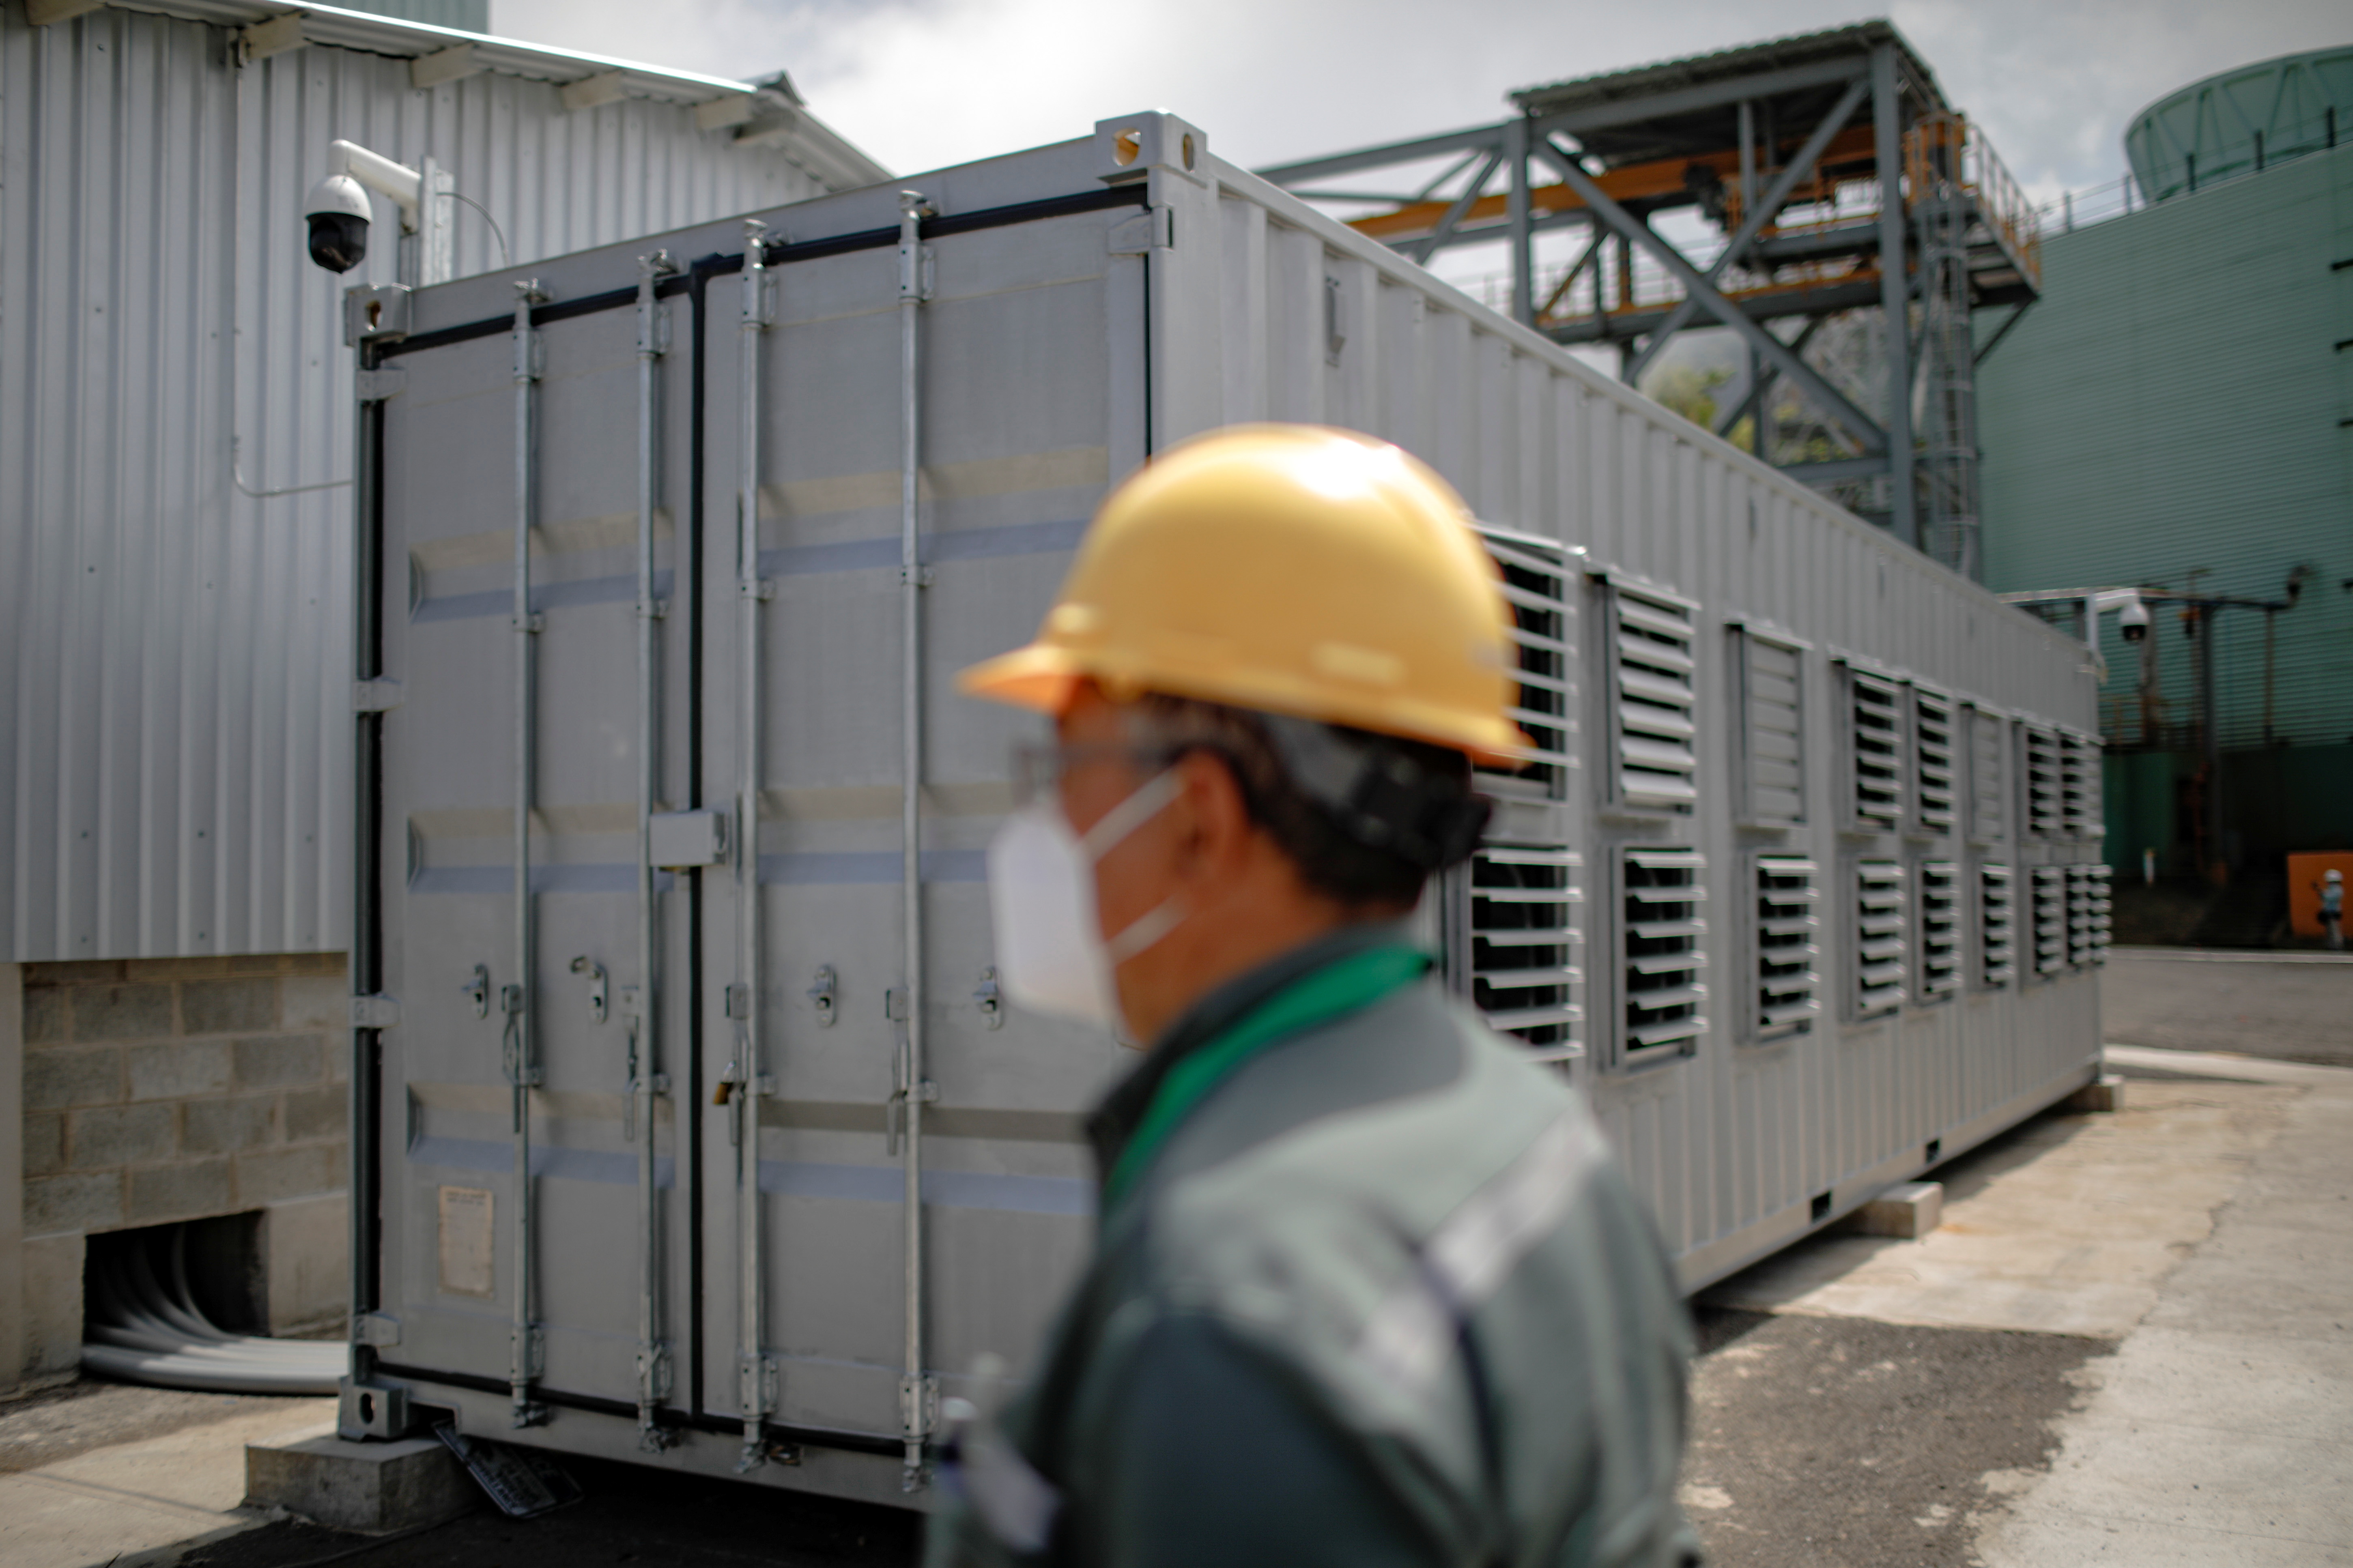 A worker is seen next to a container, where a Bitcoin mining facility is installed, at the Berlin geothermal plant of La Geo electrical company, in Alegria